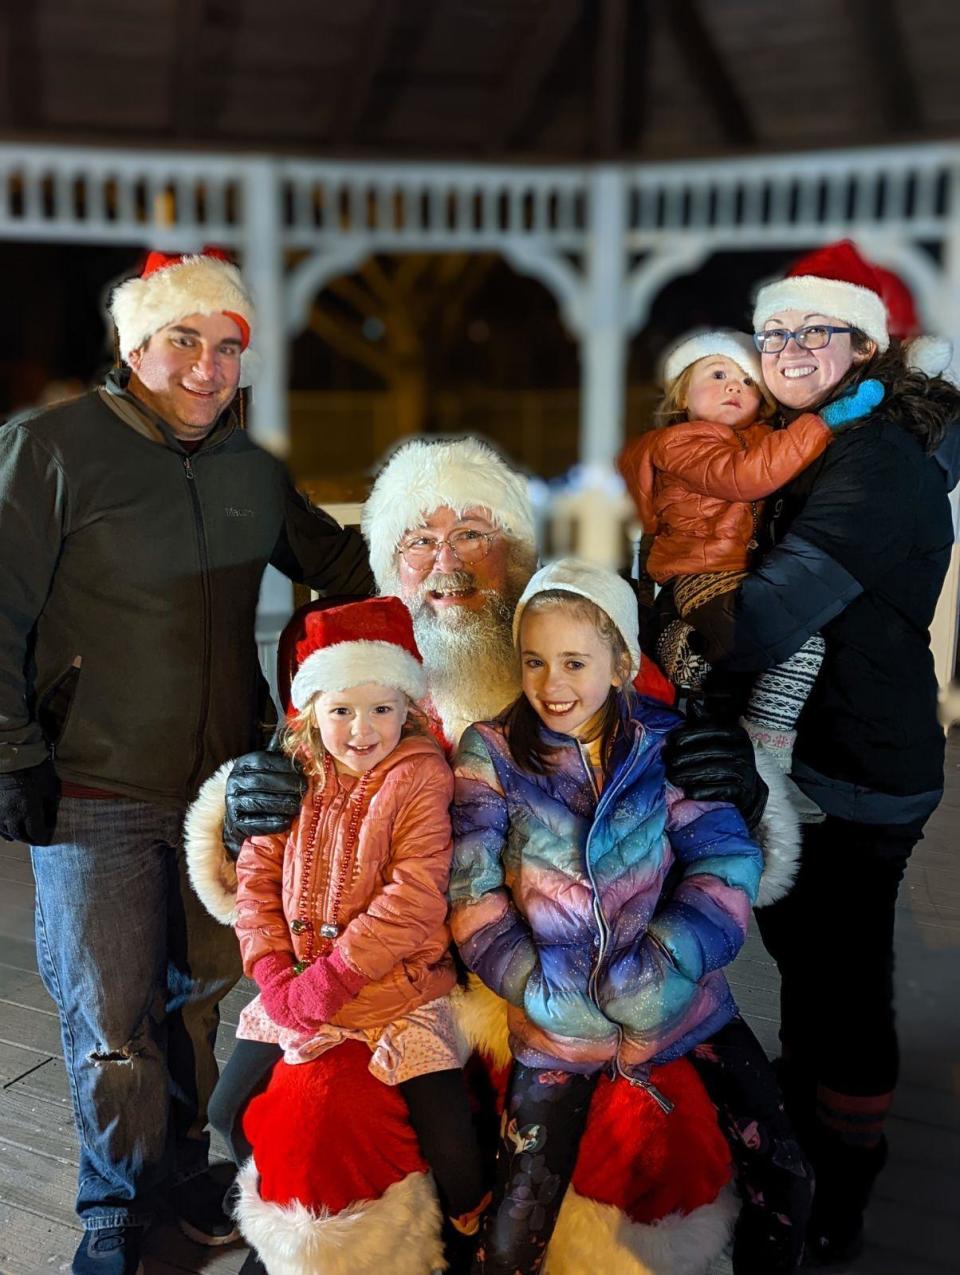 The Grossman family of Louisville visiting with Santa at last year's "Christmas in the Park" hosted by New Way United Methodist Church in Navarre